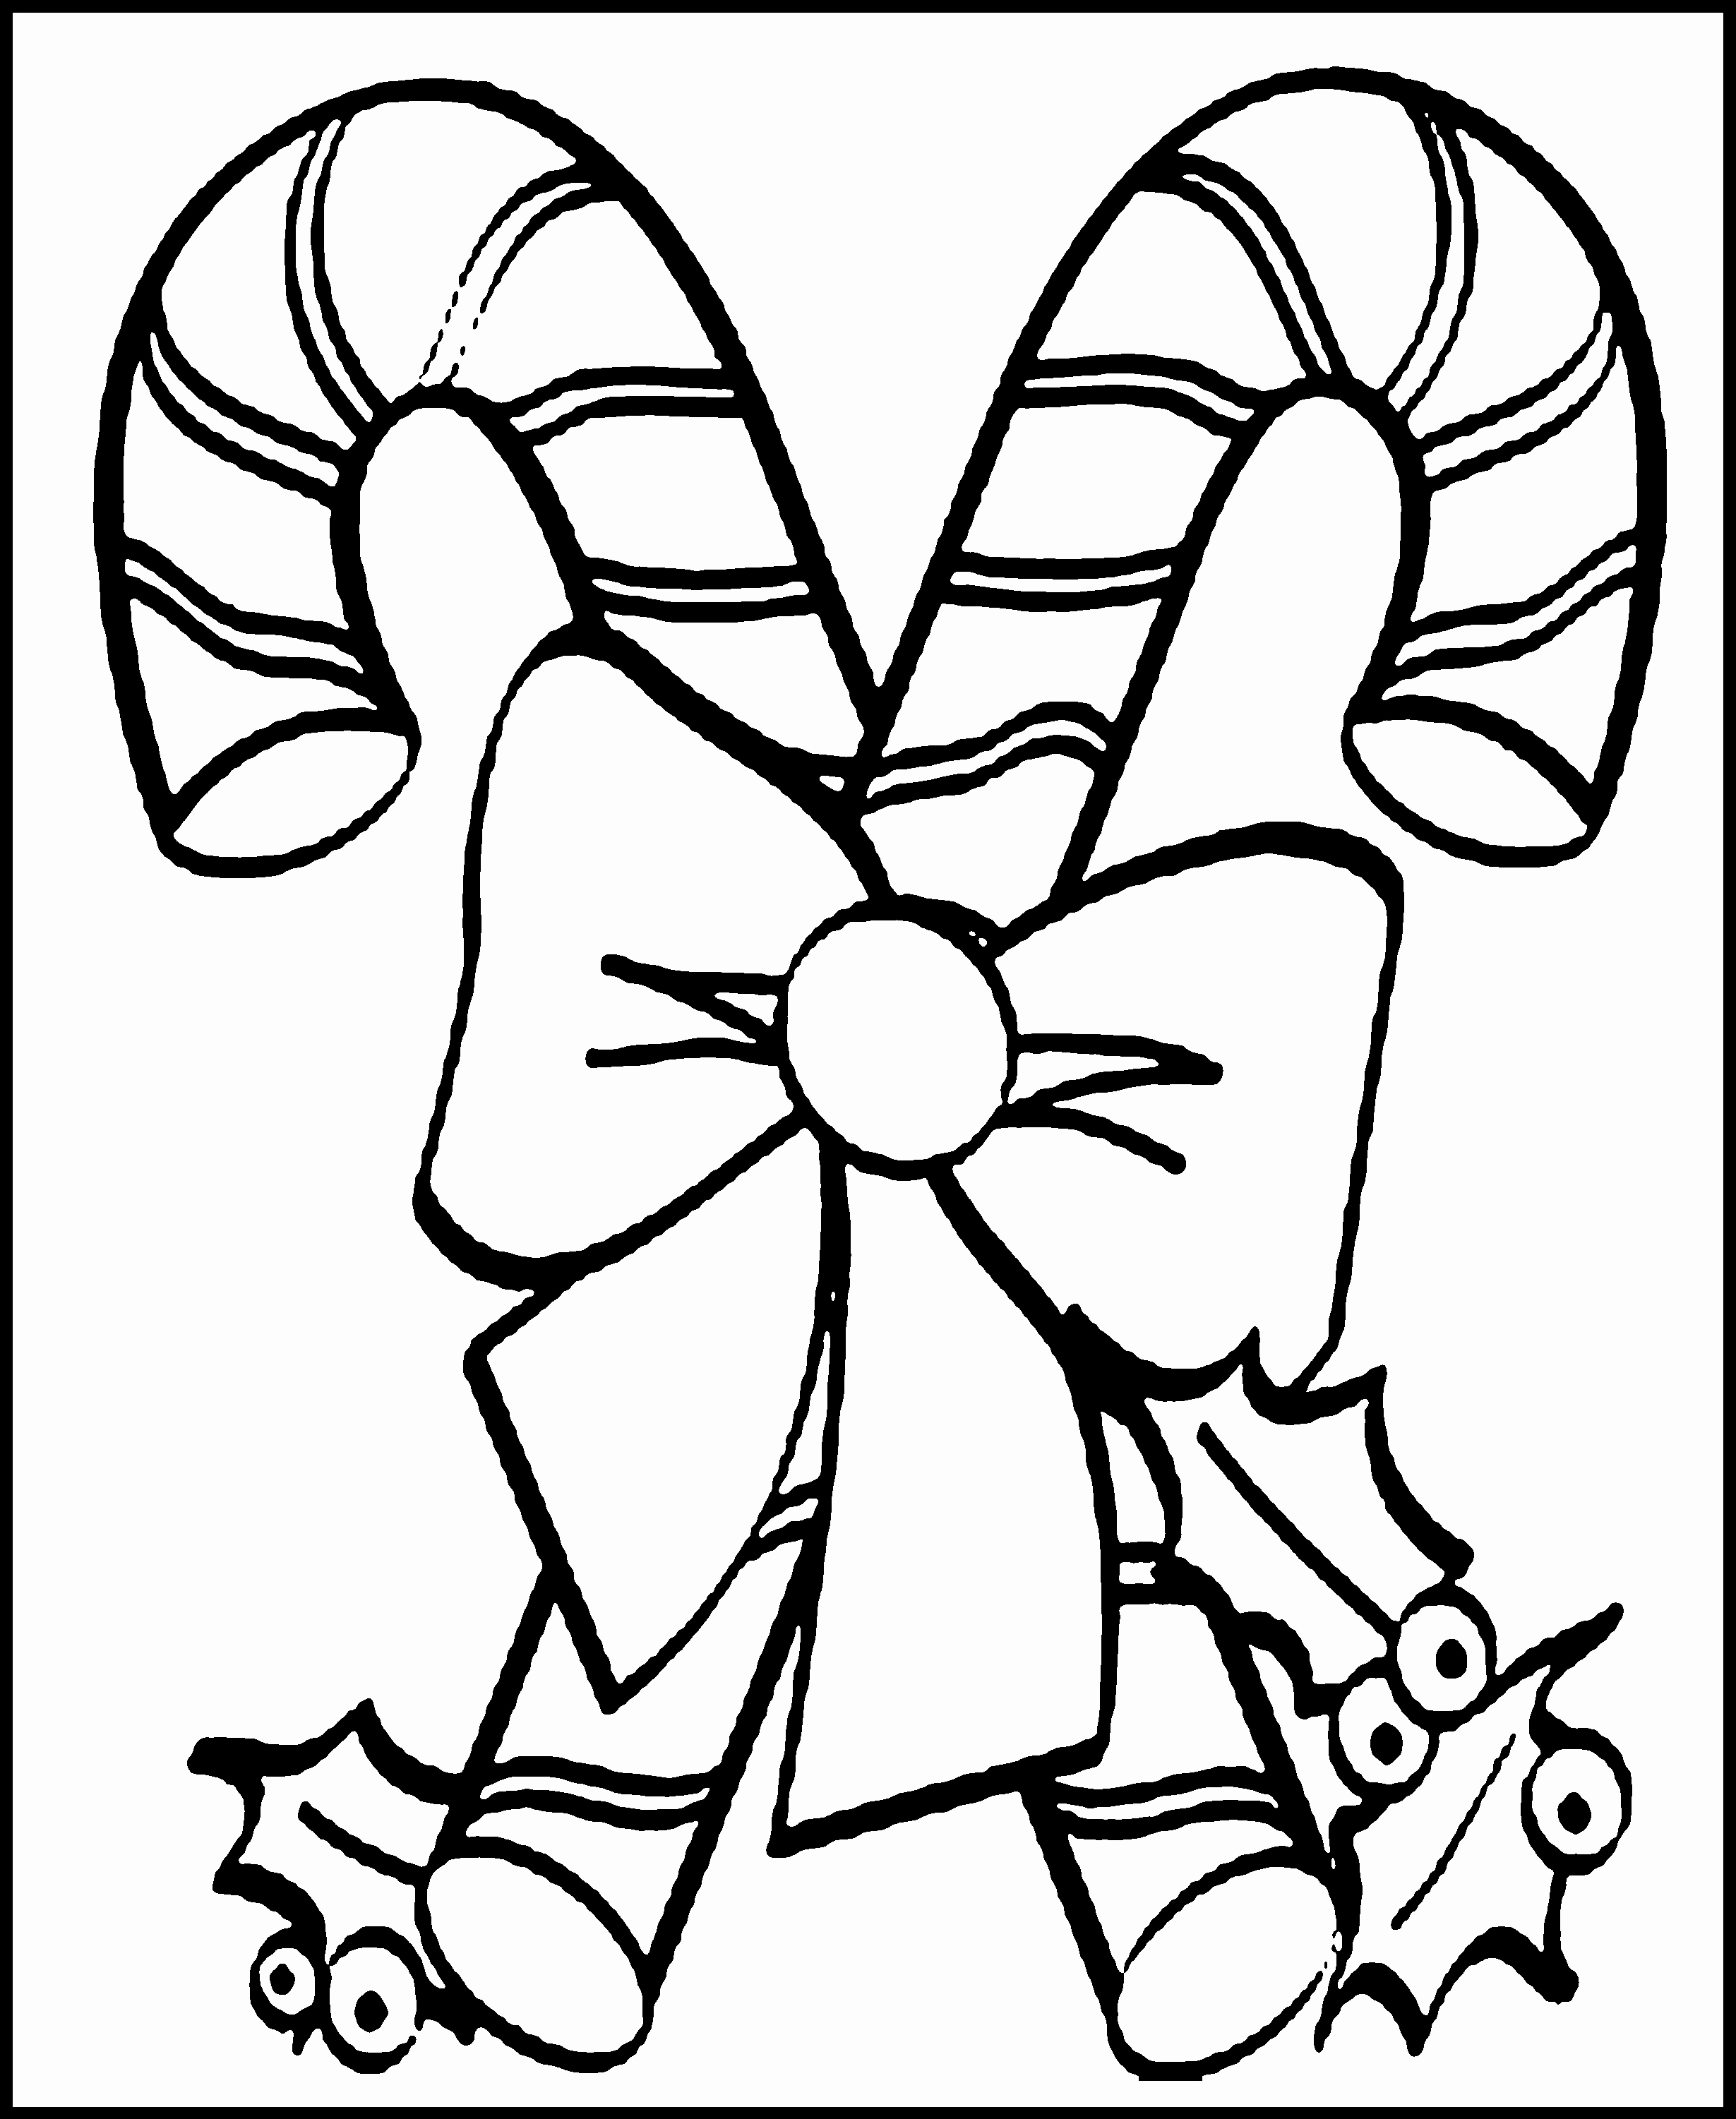 Halloween Spider Coloring Pages at GetColorings.com | Free printable